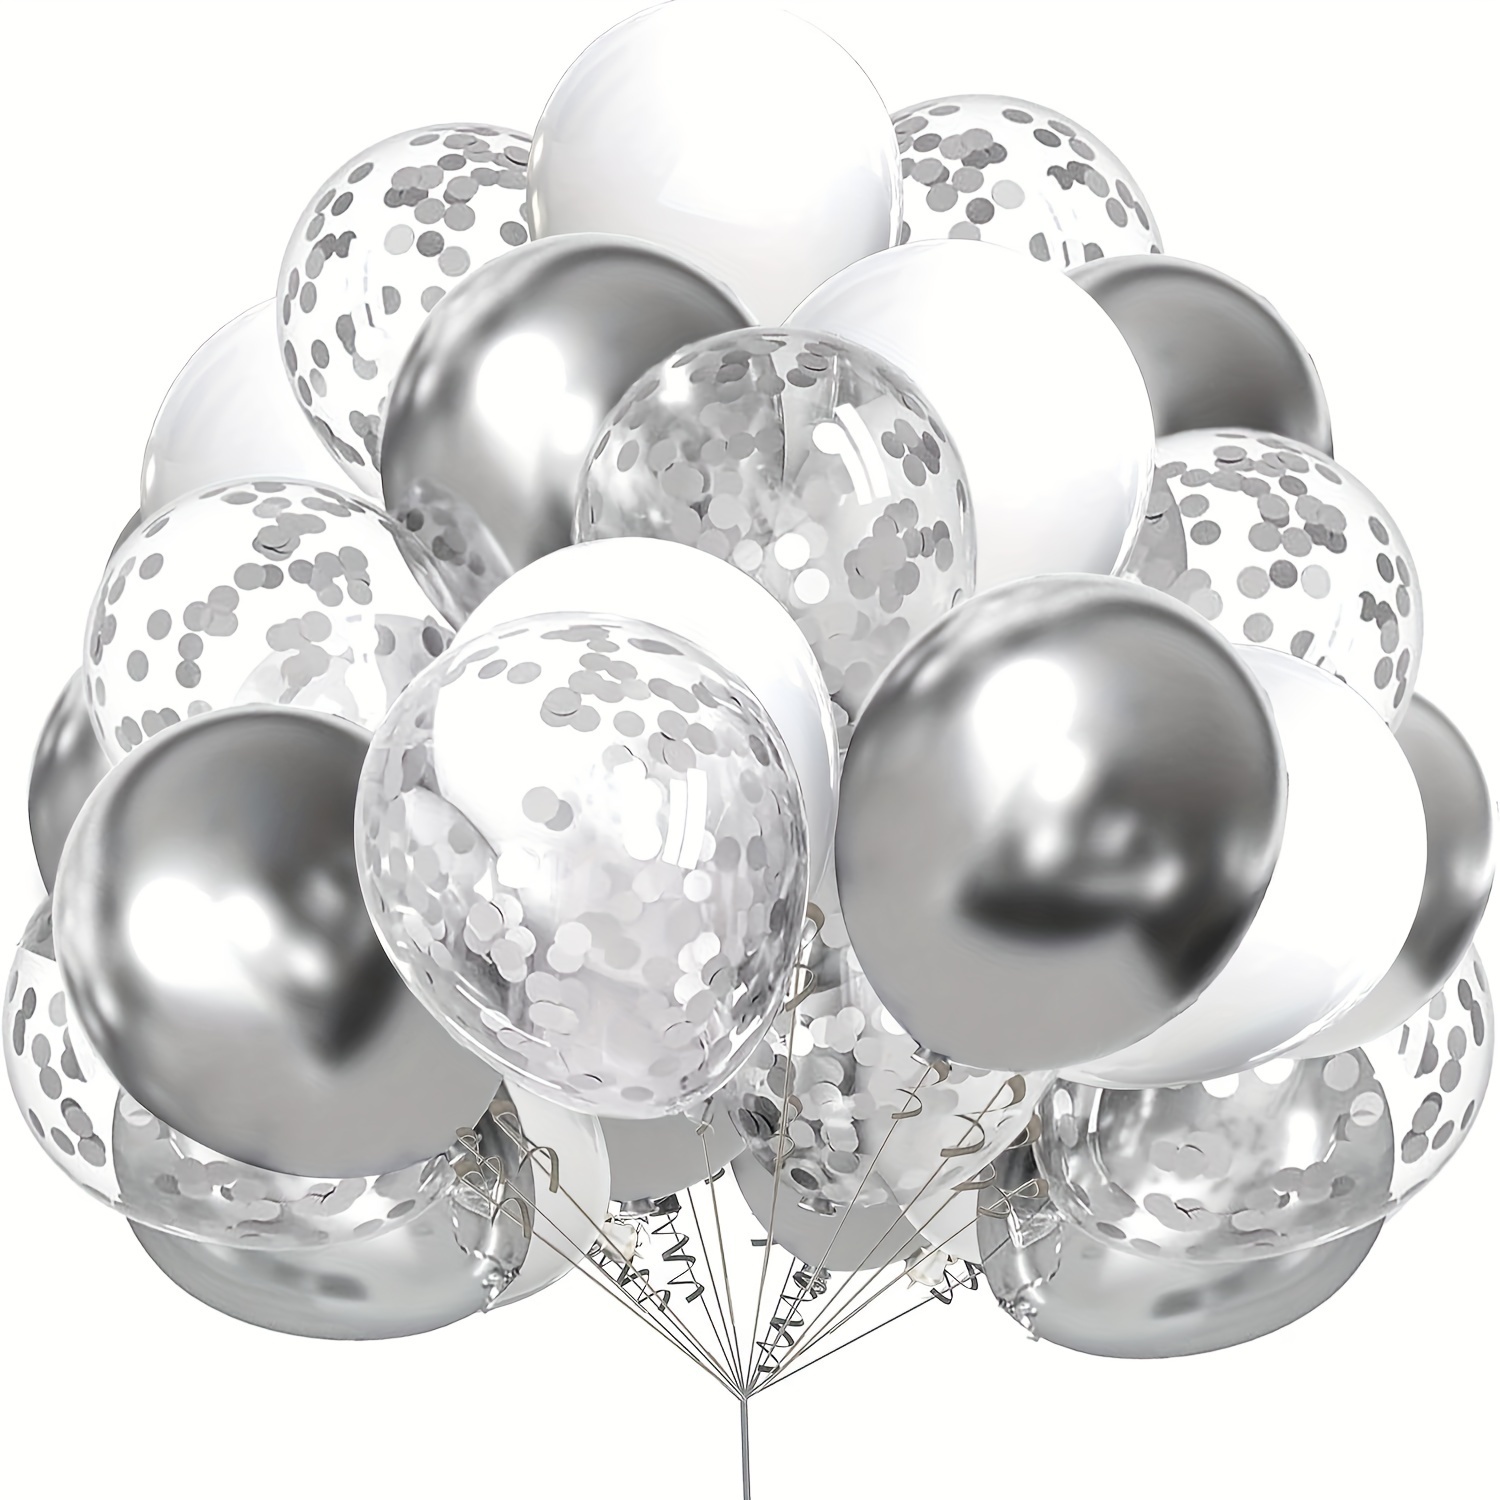 

30pcs-metal Silvery Balloons And Confetti Balloons Large Thickened Helium Latex Balloons With Silvery Ribbon, Suitable For Birthday Graduation Wedding Party Decoration Eid Al-adha Mubarak